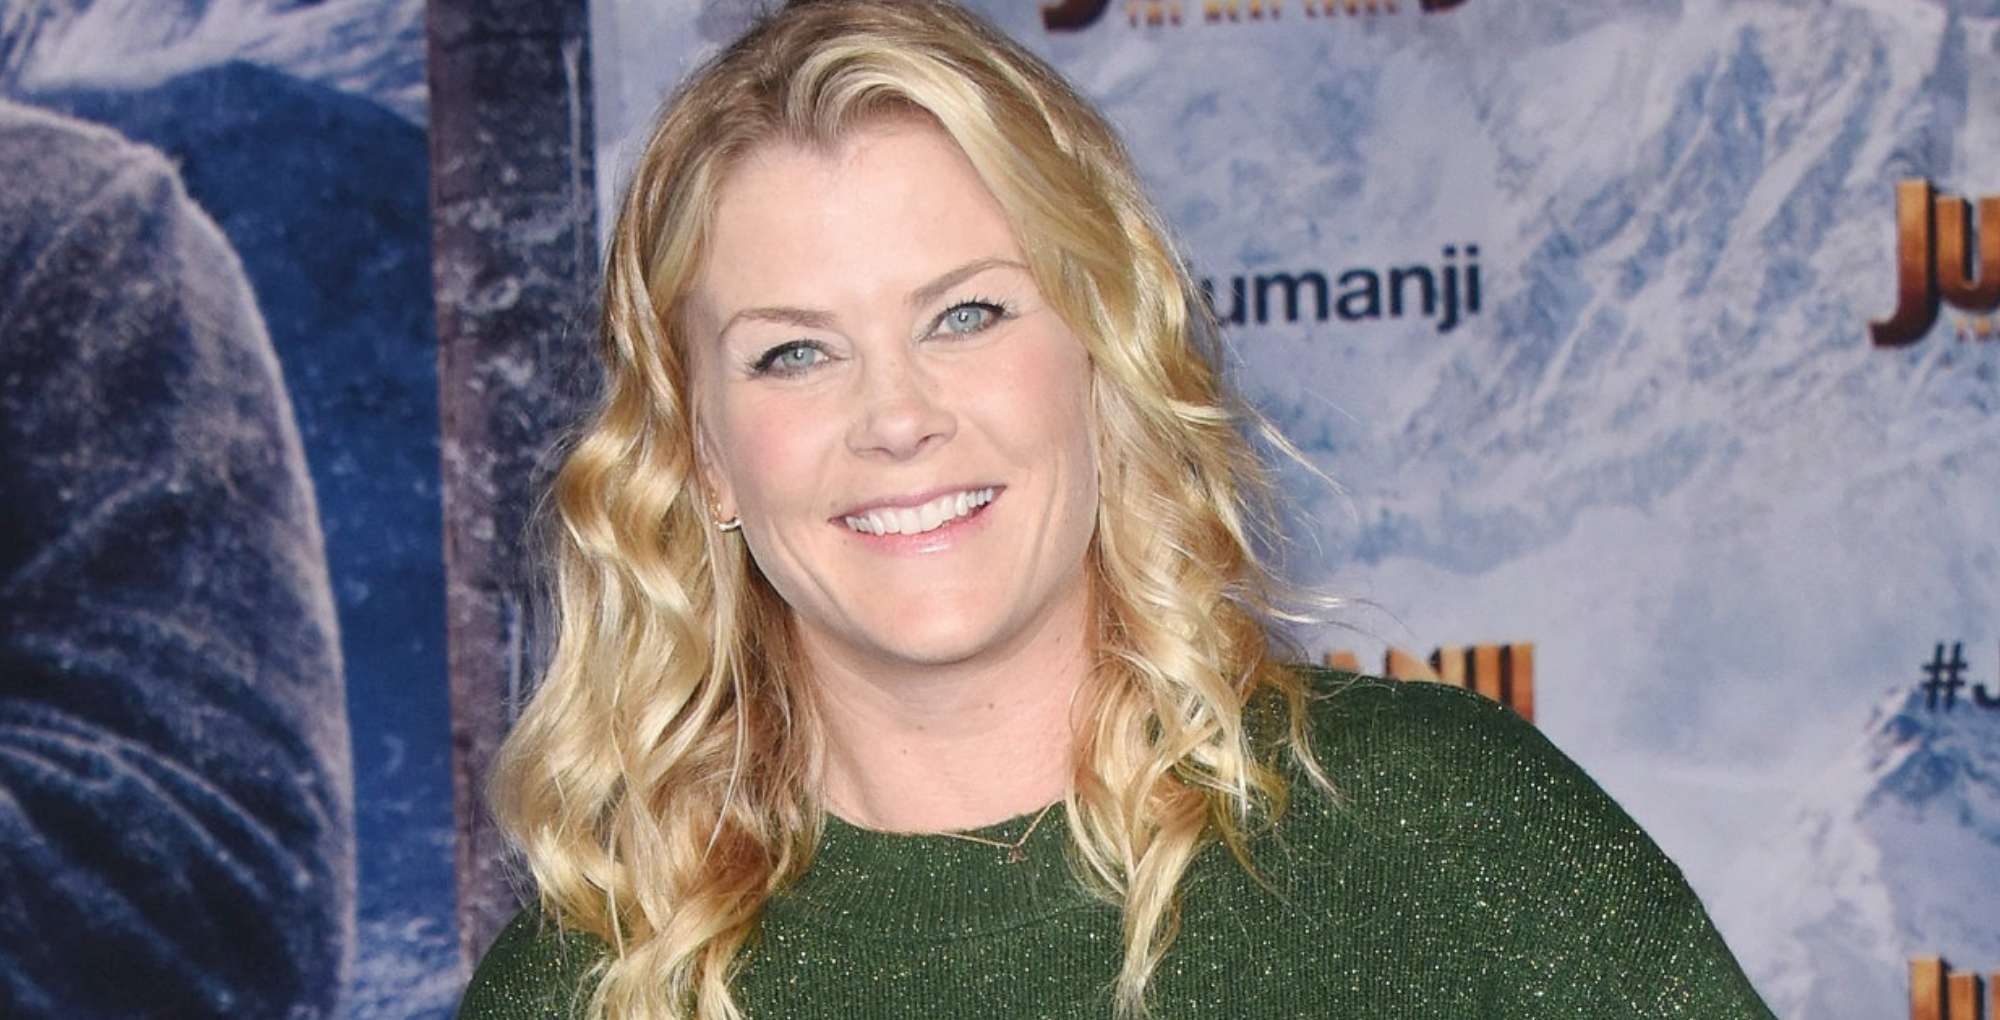 days of our lives and hallmark star alison sweeney wearing green.